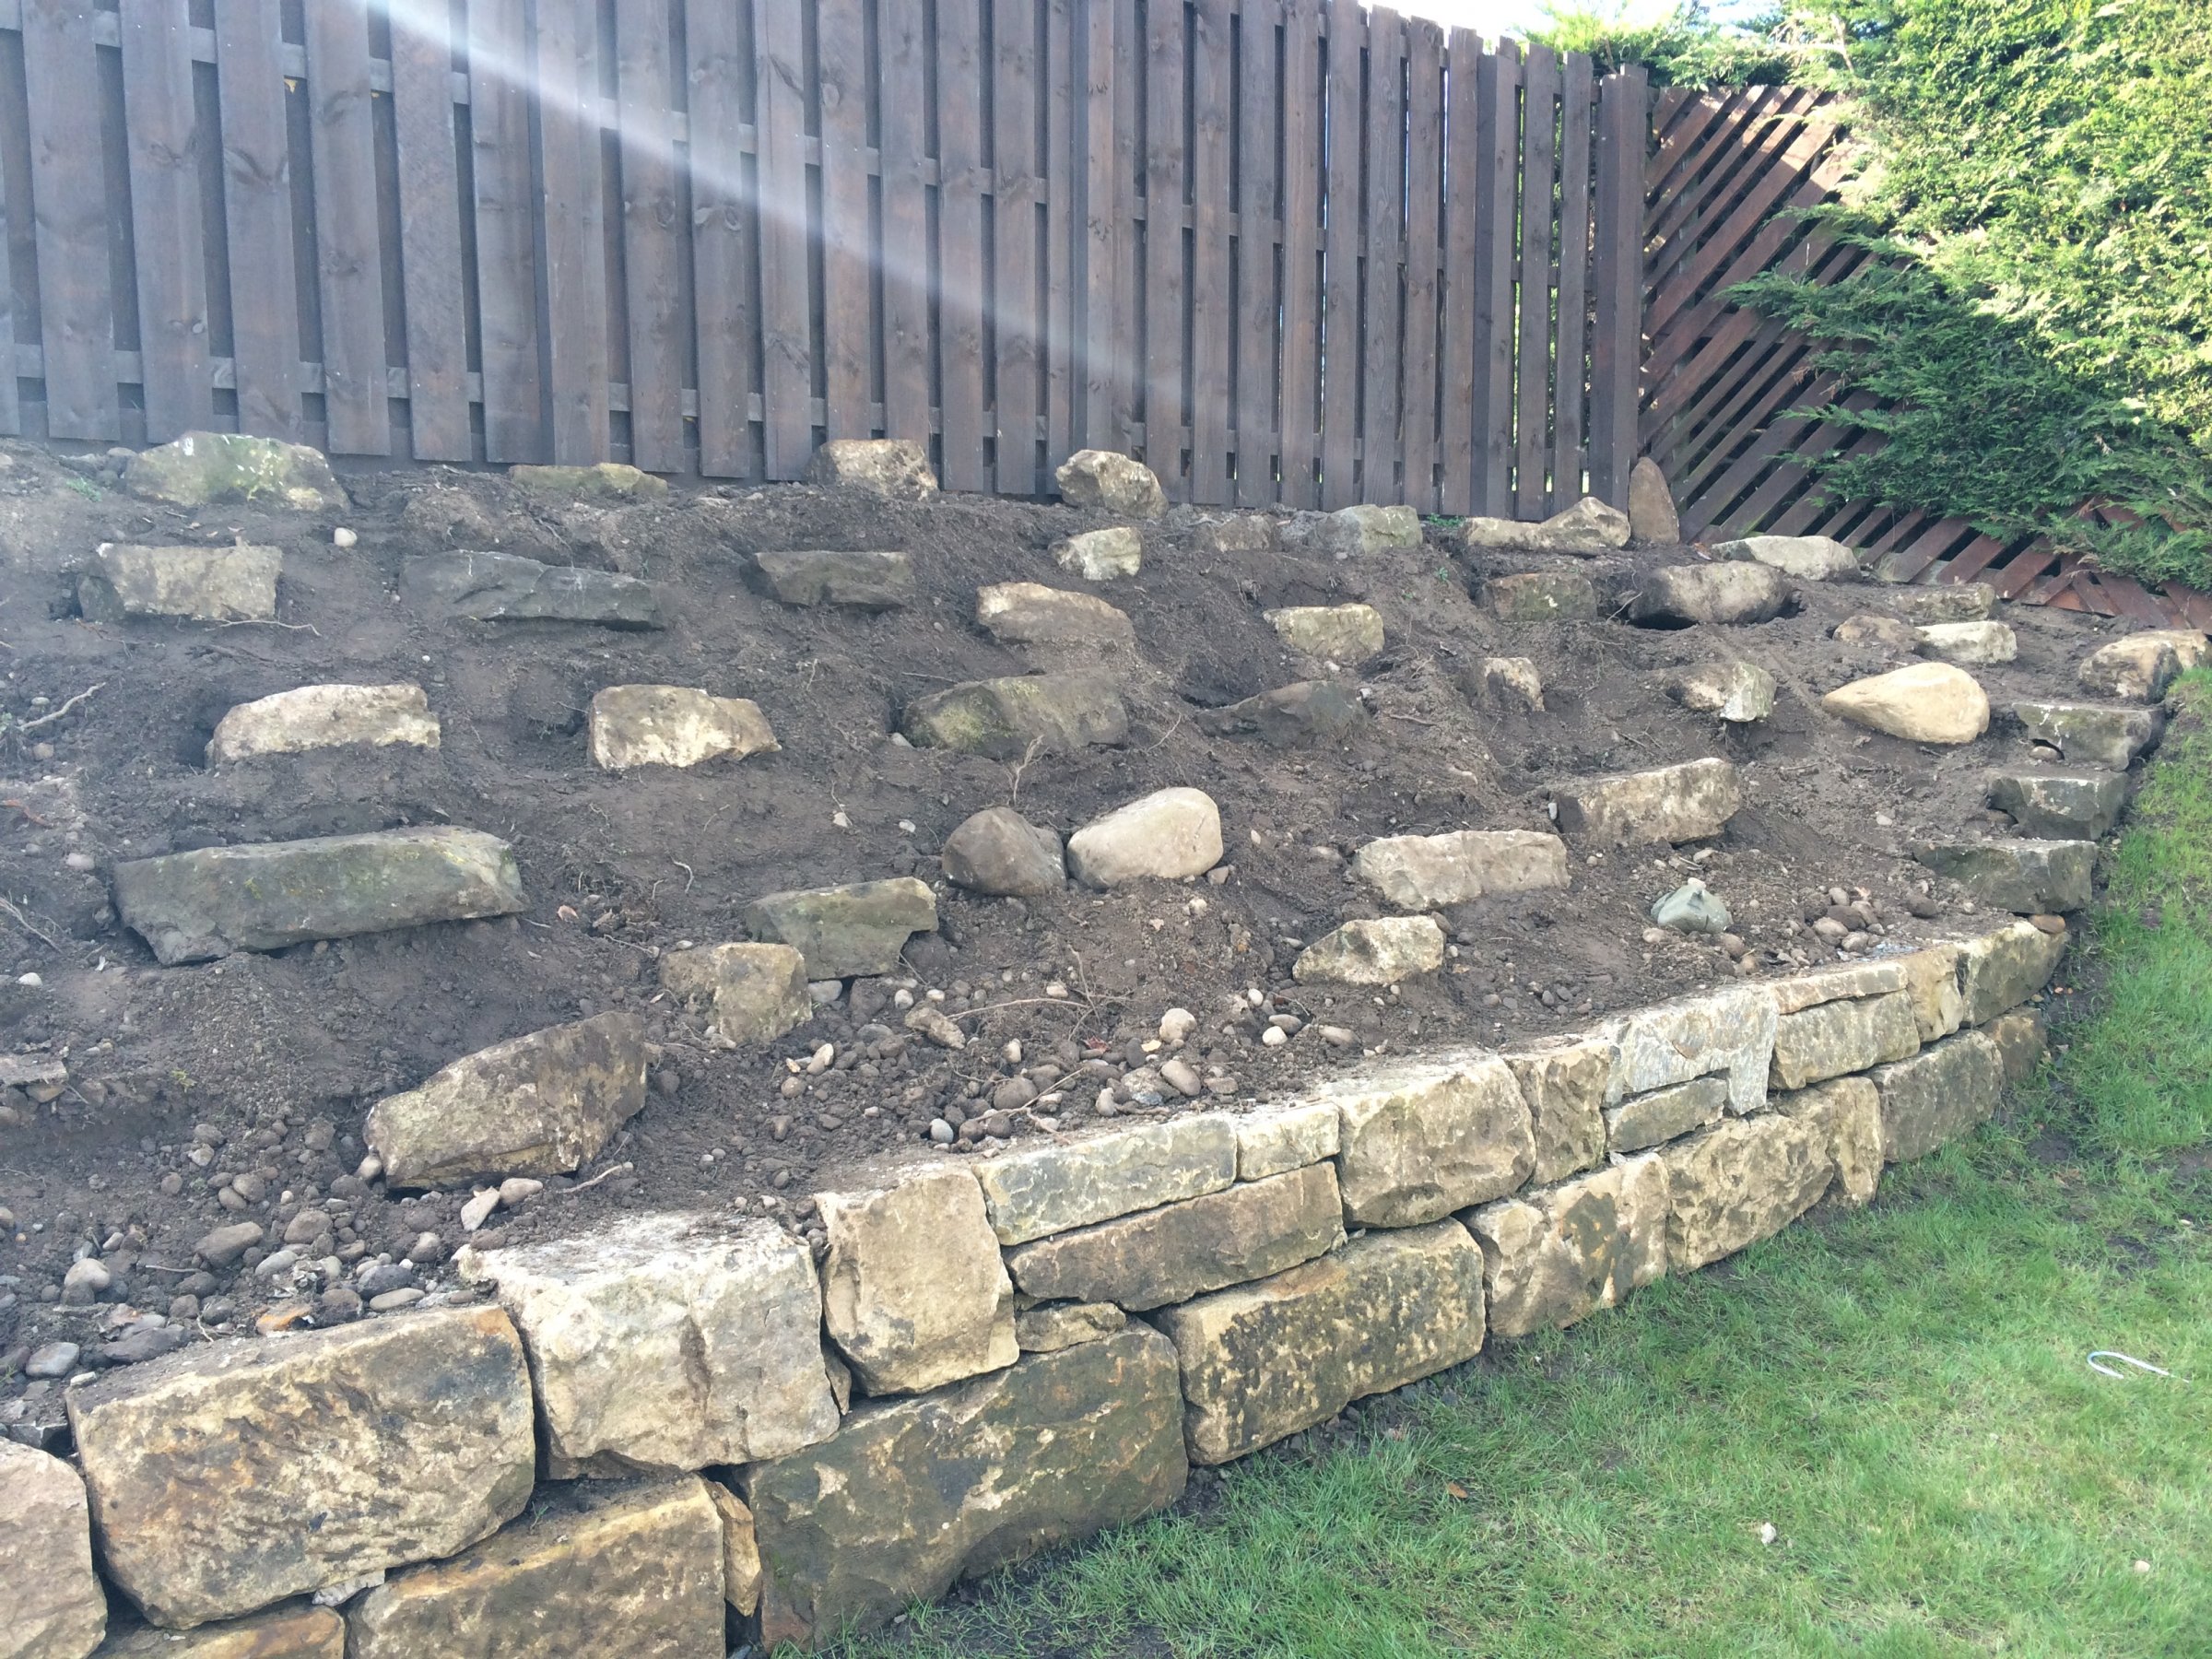 The final part - a rock garden at the back fence